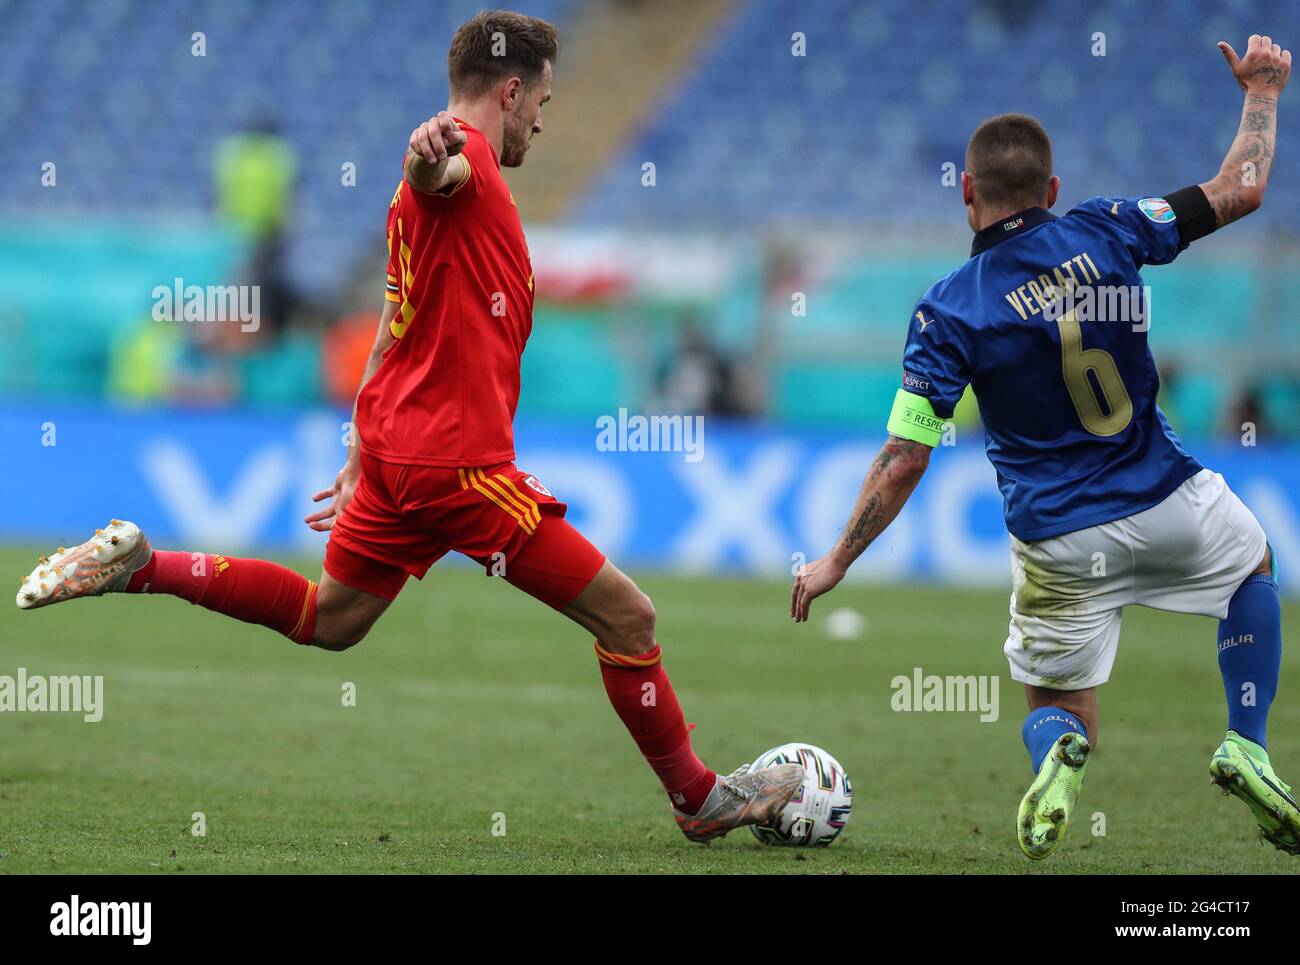 Rome. 20th June, 2021. Italy's Marco Verratti (R) vies with Wales' Aaron  Ramsey during the UEFA EURO 2020 Group A football match between Italy and  Wales at the Olympic Stadium in Rome